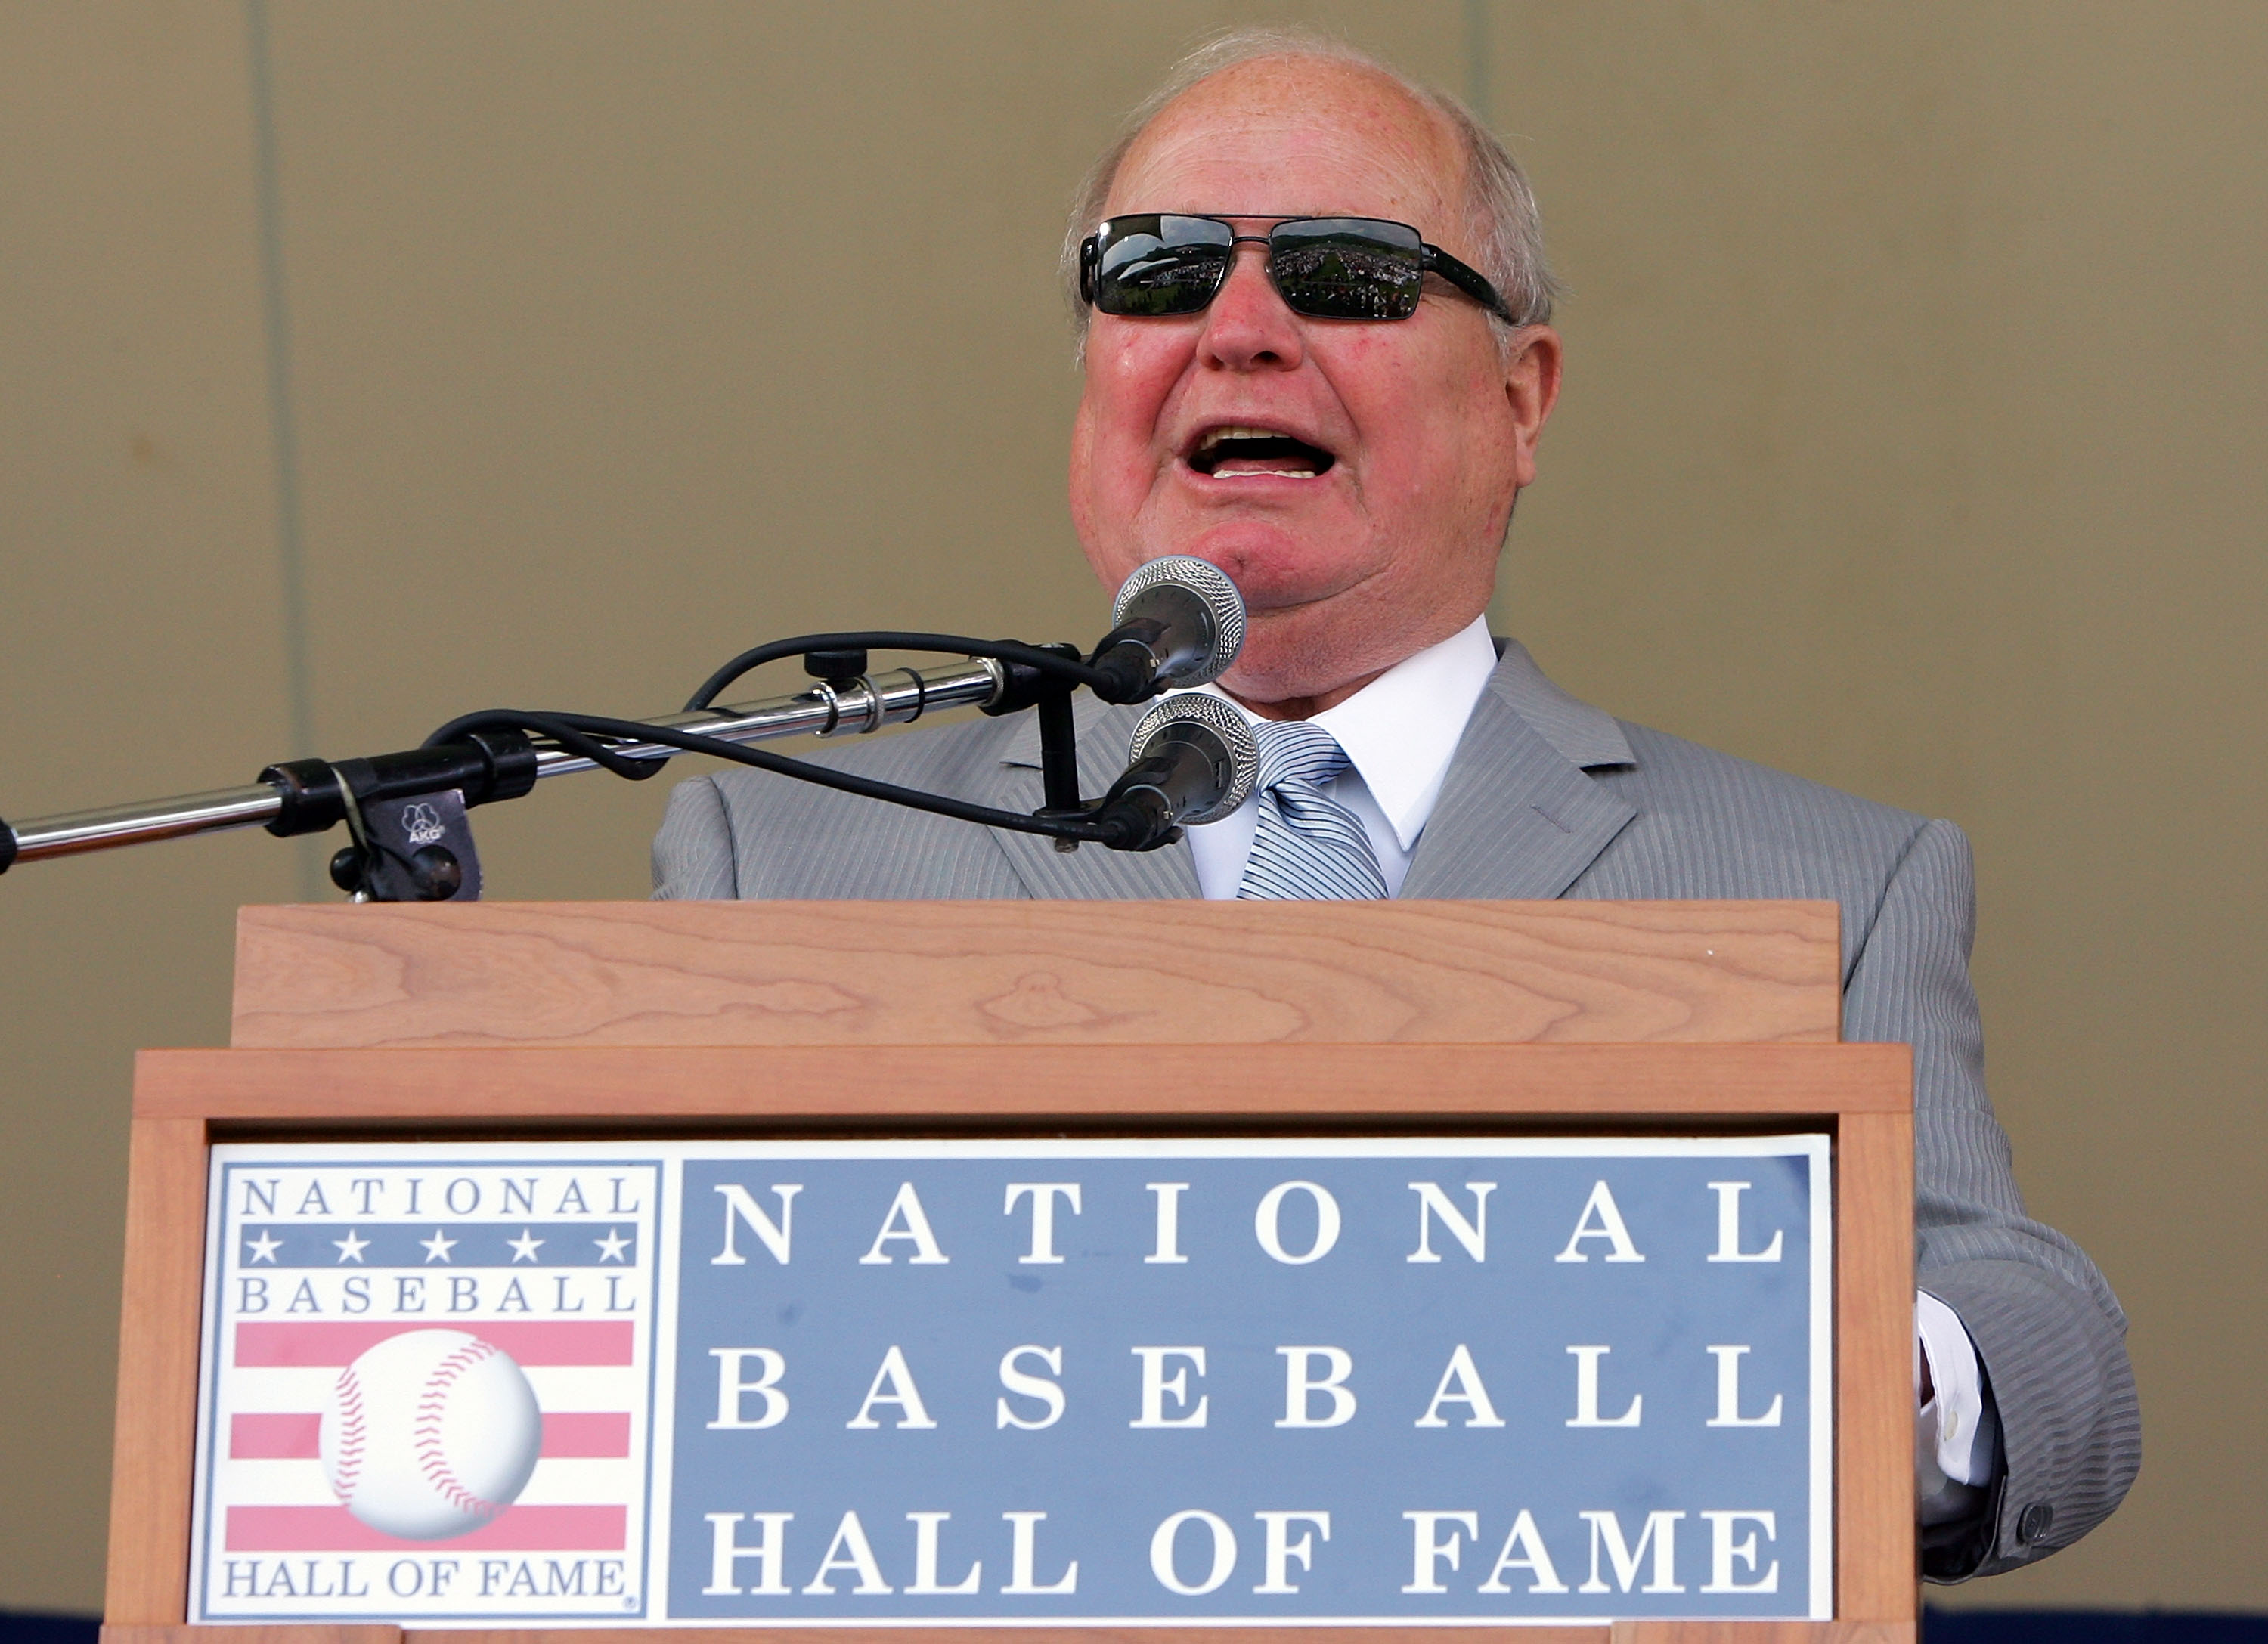 COOPERSTOWN, NY - JULY 27:  Dave Niehaus gives a speech after accepting the Ford C. Frick award for excellence in broadcasting at Clark Sports Center during the Baseball Hall of Fame induction ceremony on July 27, 2008 in Cooperstown, New York.  (Photo by